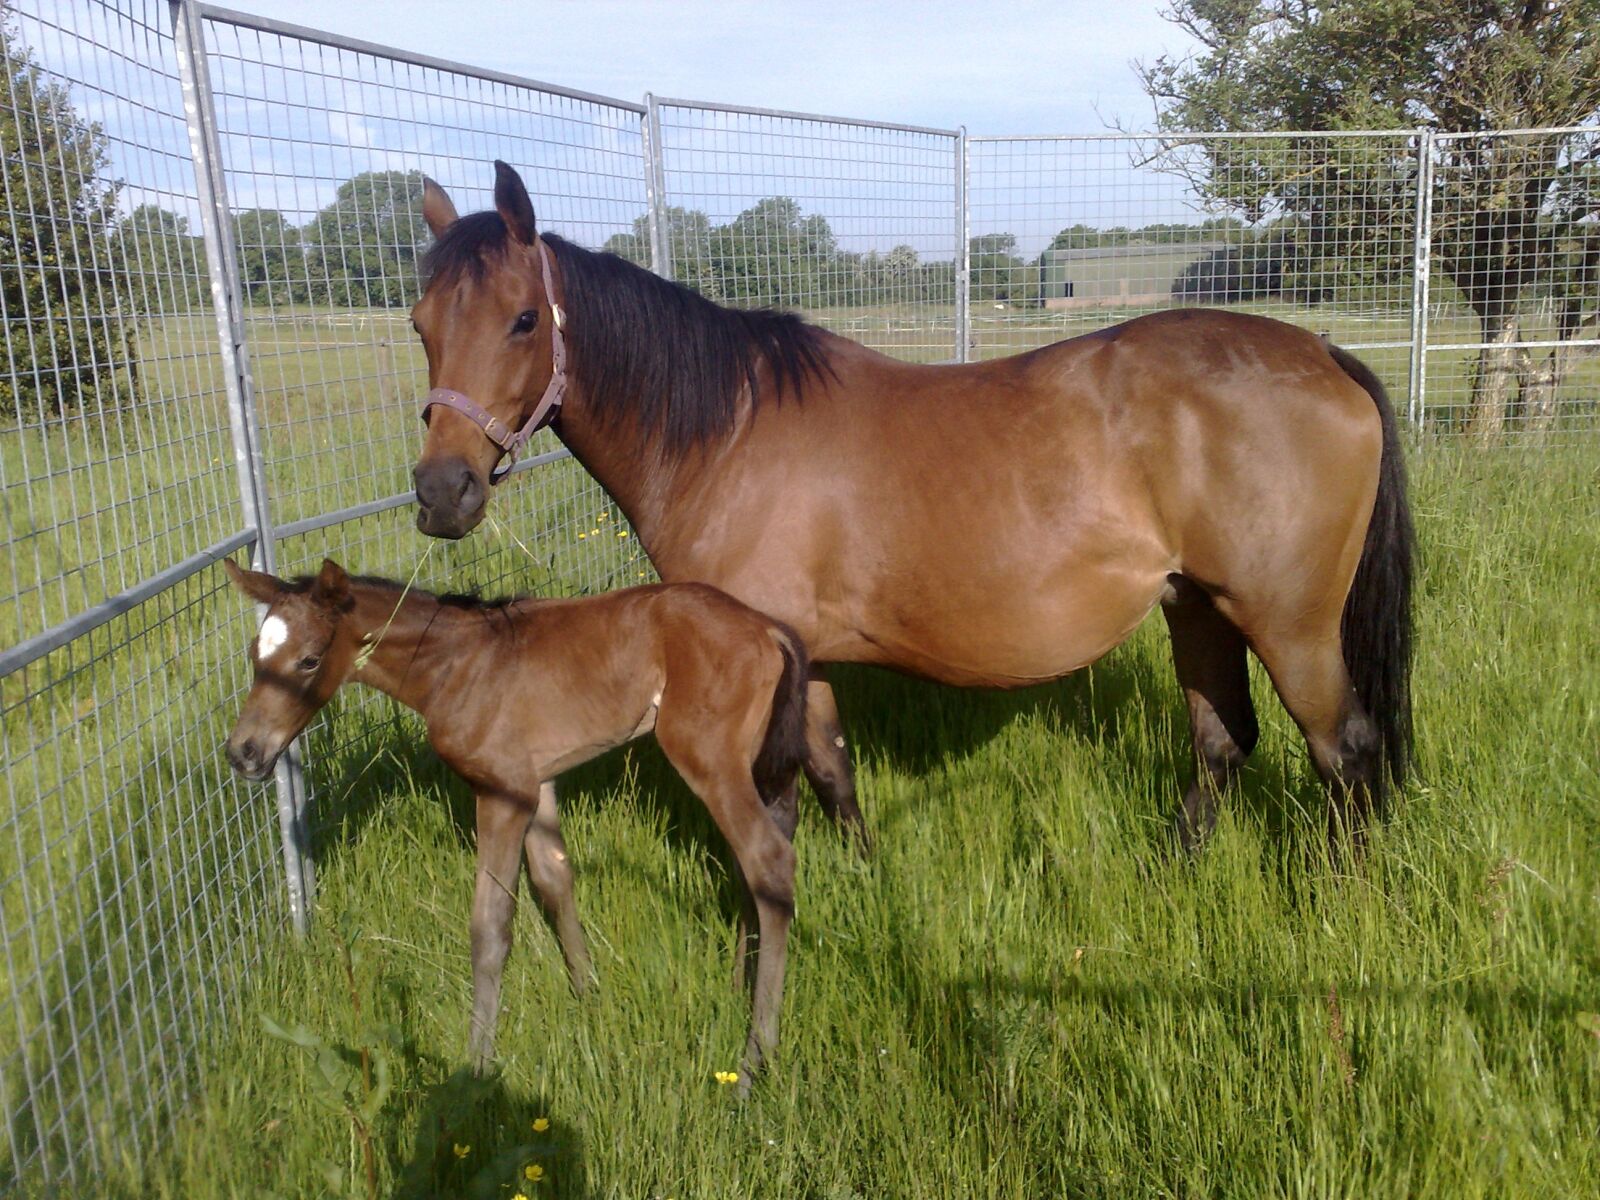 Nokia N95 8GB sample photo. Horse and foal, field photography